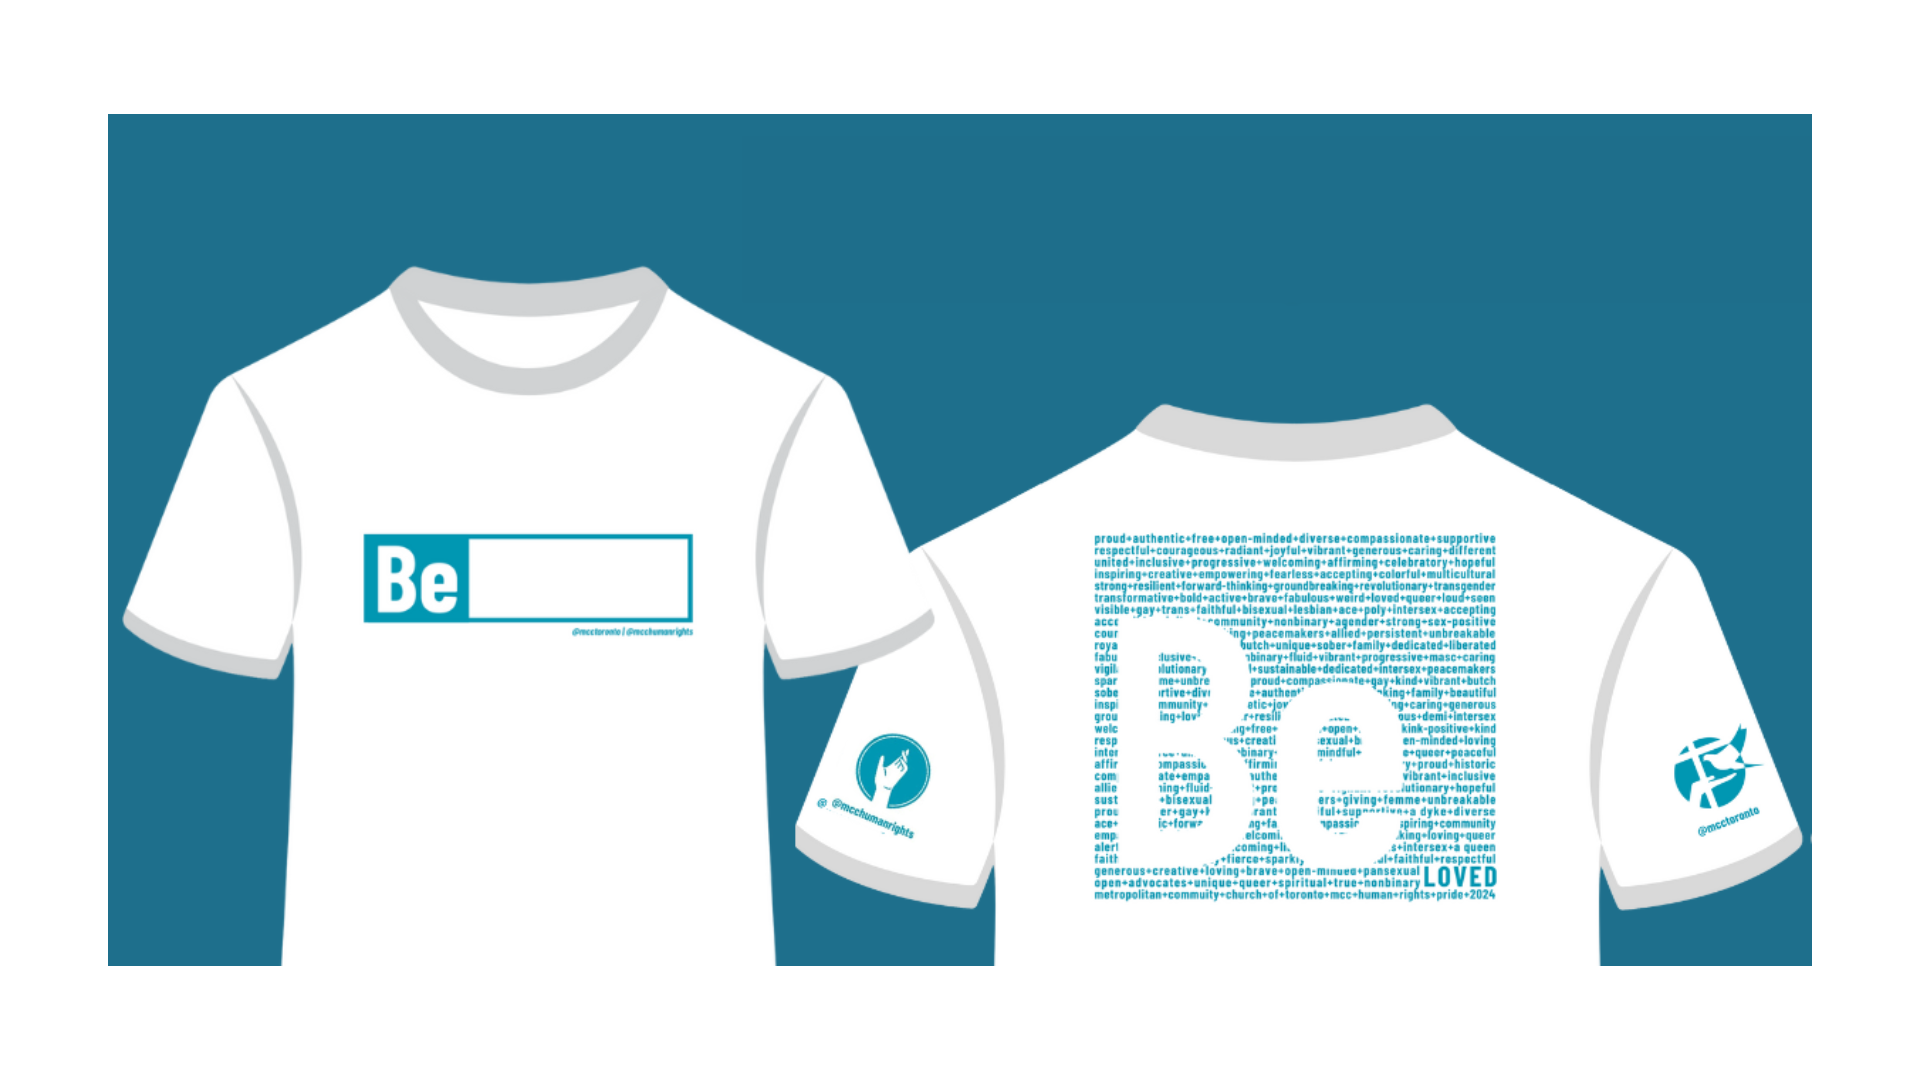 "Illustration of a white T-shirt with blue and white design. The front of the shirt features the word 'Be' in bold blue letters followed by a blank space, allowing for customization. The back of the shirt has a large 'Be' composed of smaller words and phrases such as 'proud,' 'authentic,' 'supportive,' and 'diverse.' There are small logos on both sleeves; the left sleeve shows a hand symbol with the text '@mcctoronto / @mcctorights,' and the right sleeve has a fish symbol with the text '@mcctoronto